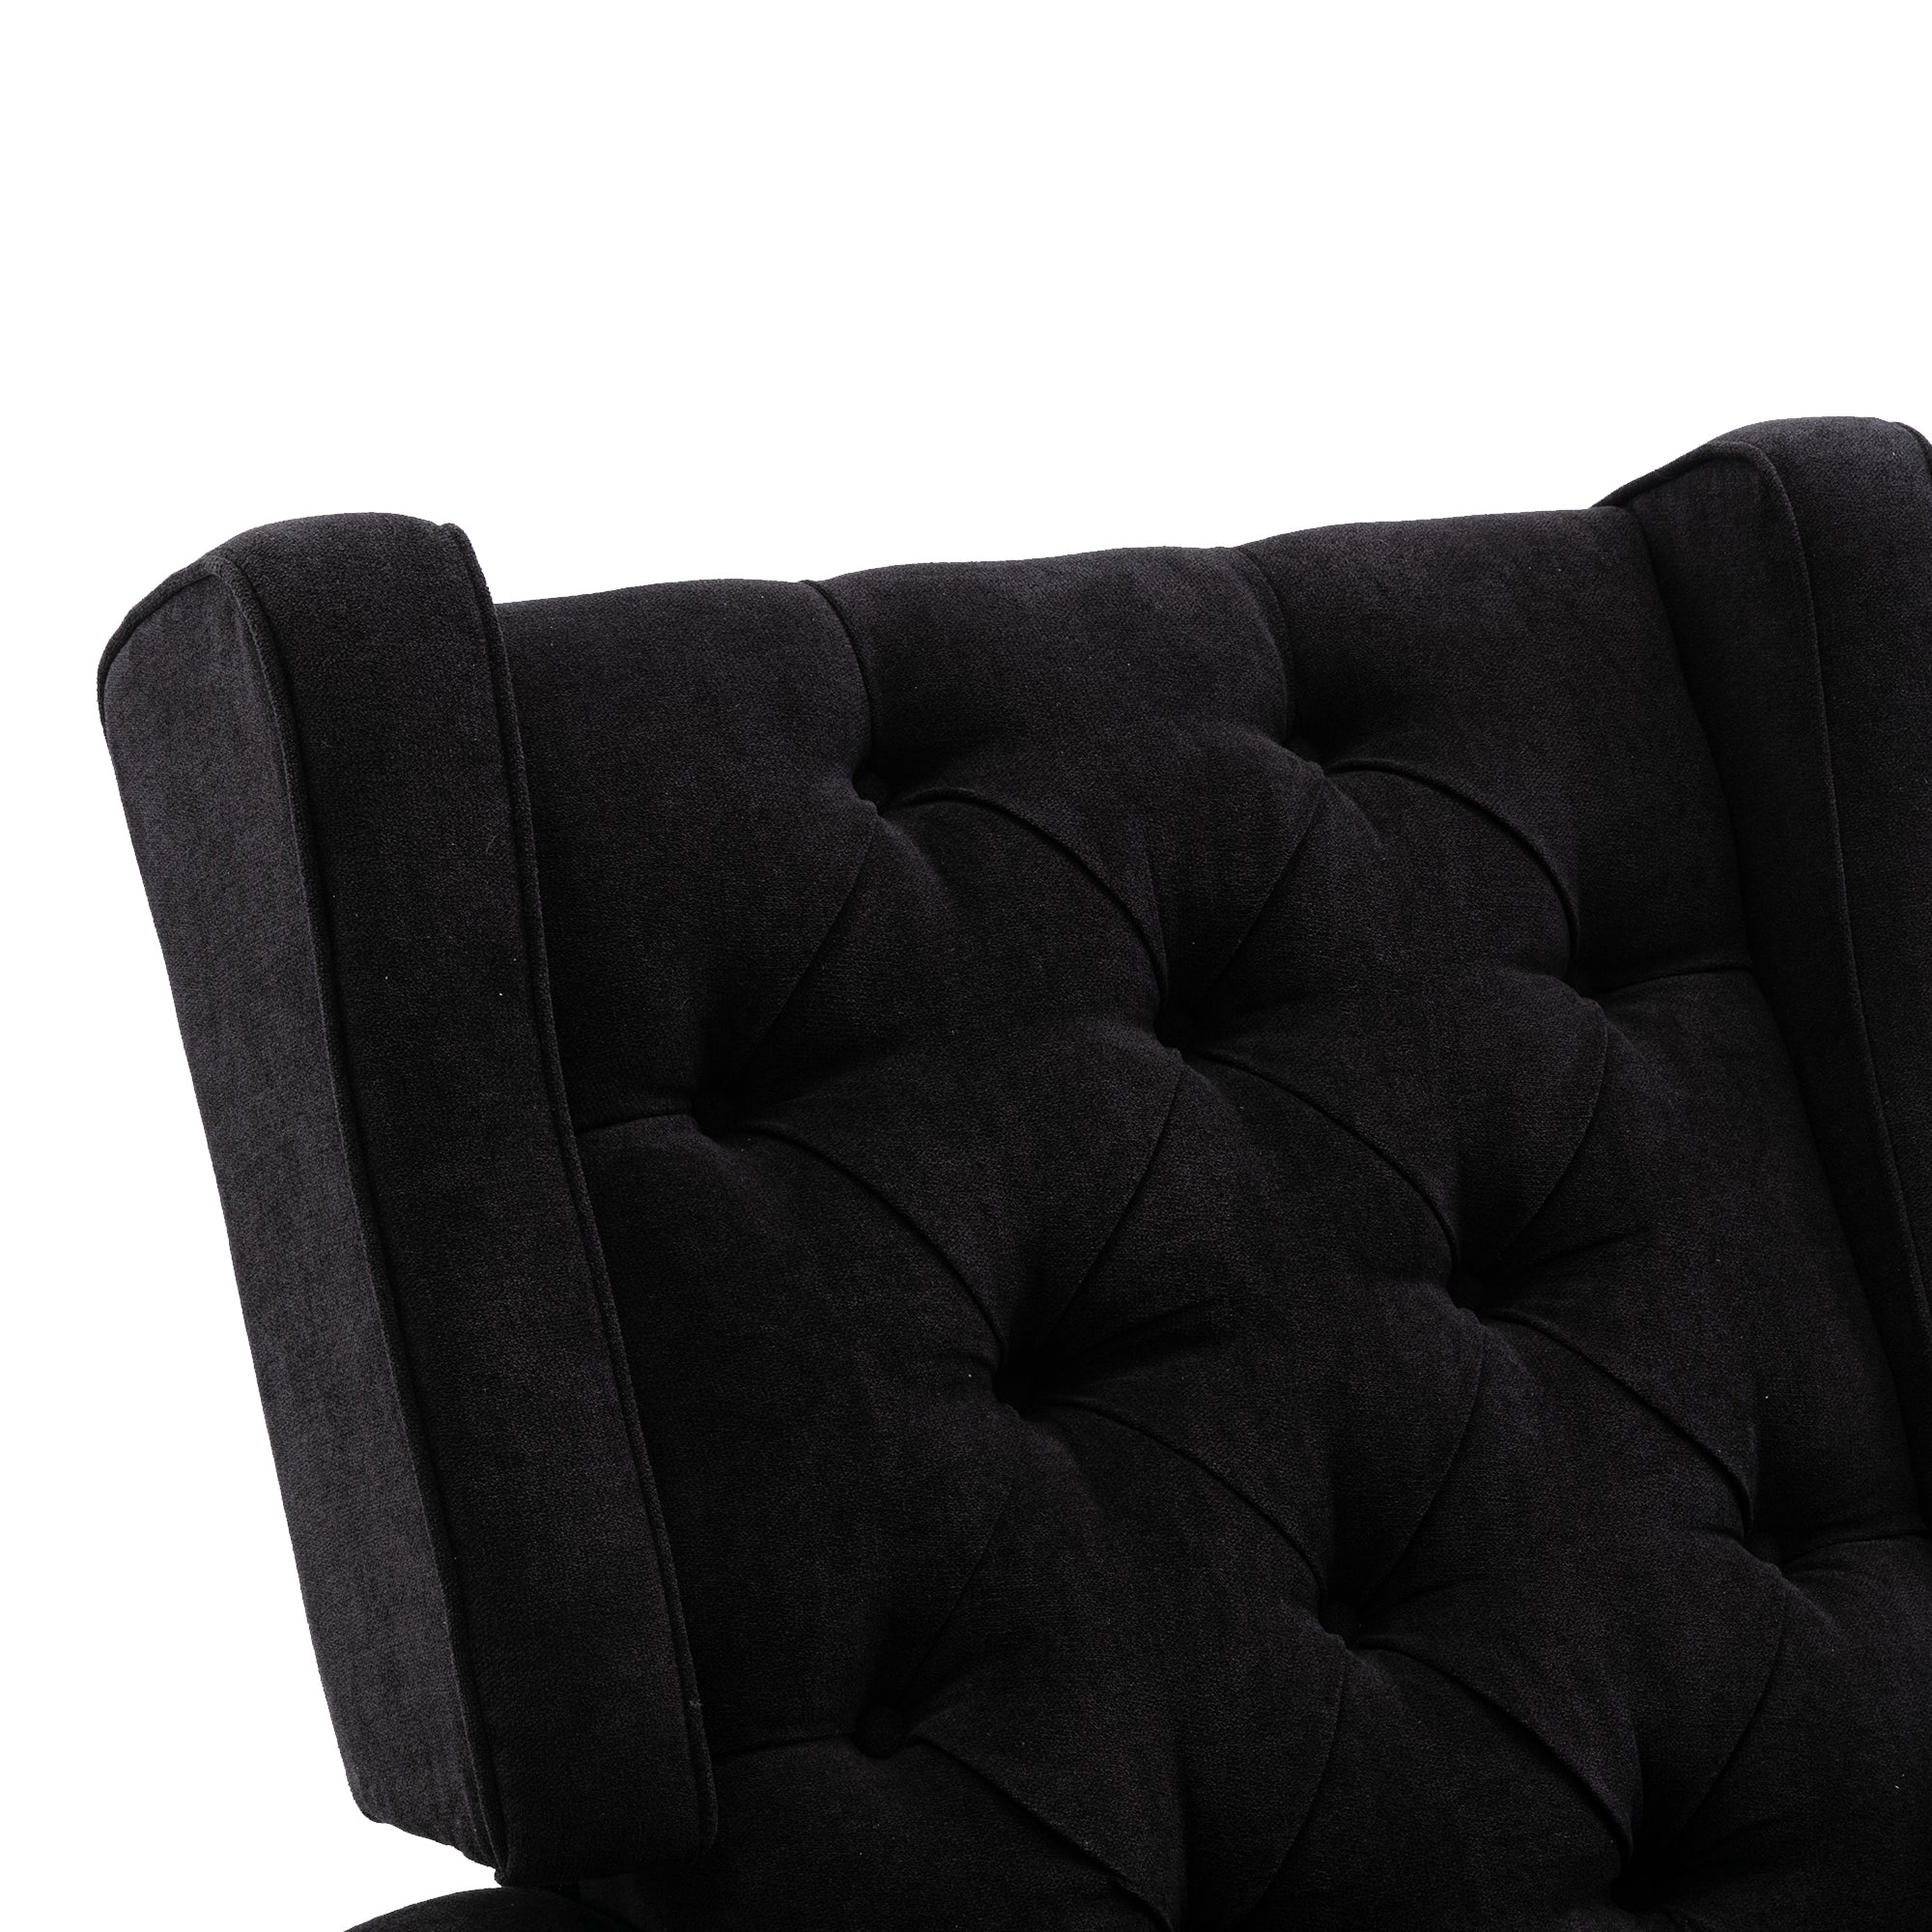 COOLMORE living room Comfortable rocking chair accent black-polyester